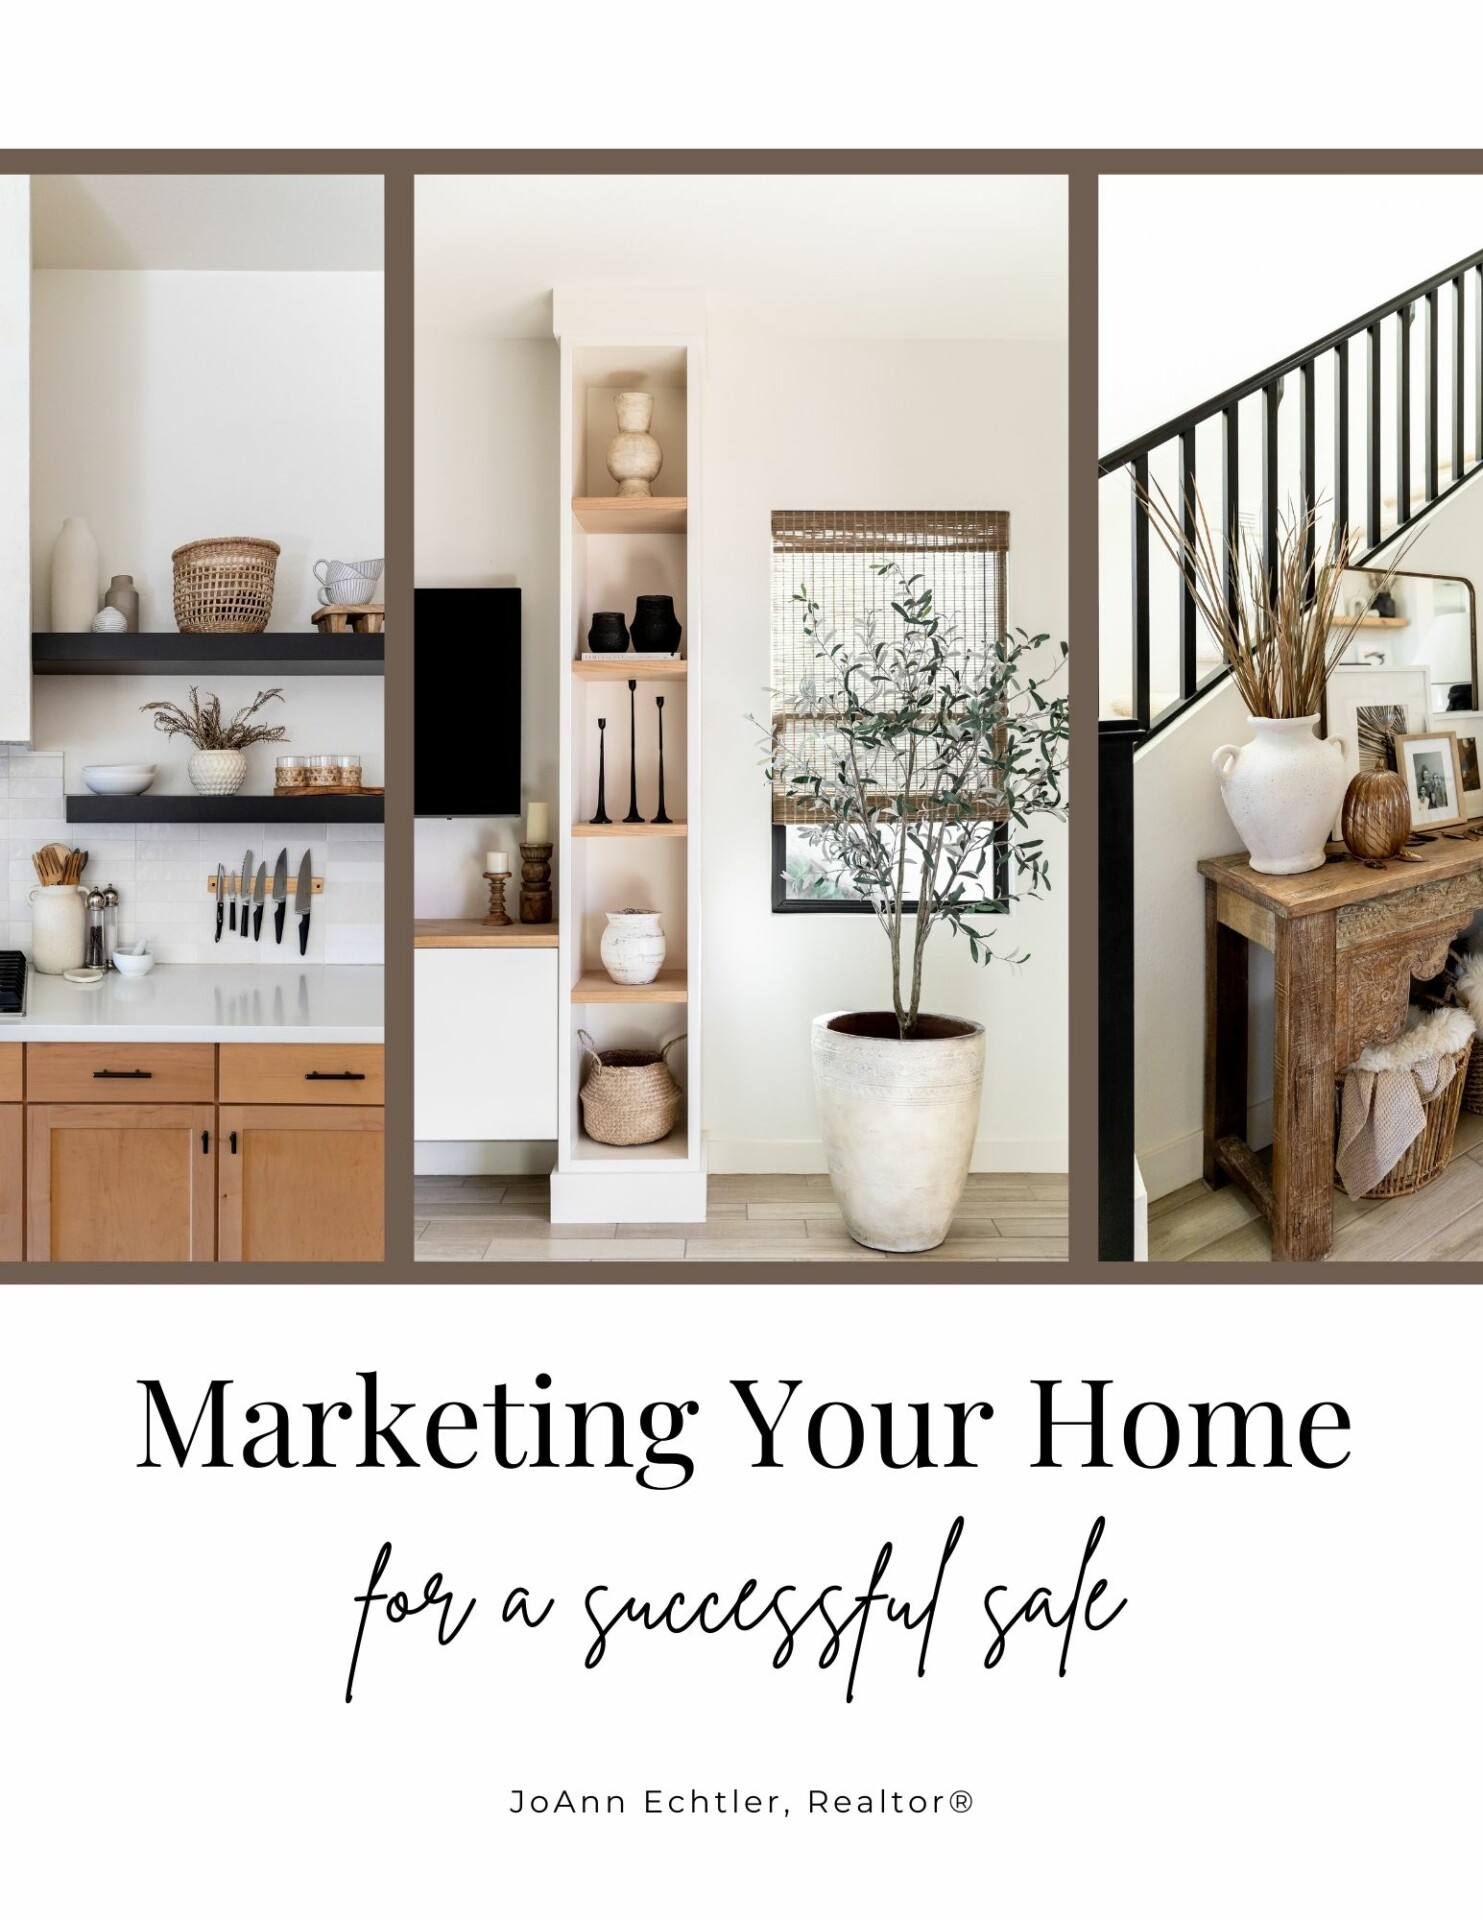 Marketing Your Home for a Successful Sale